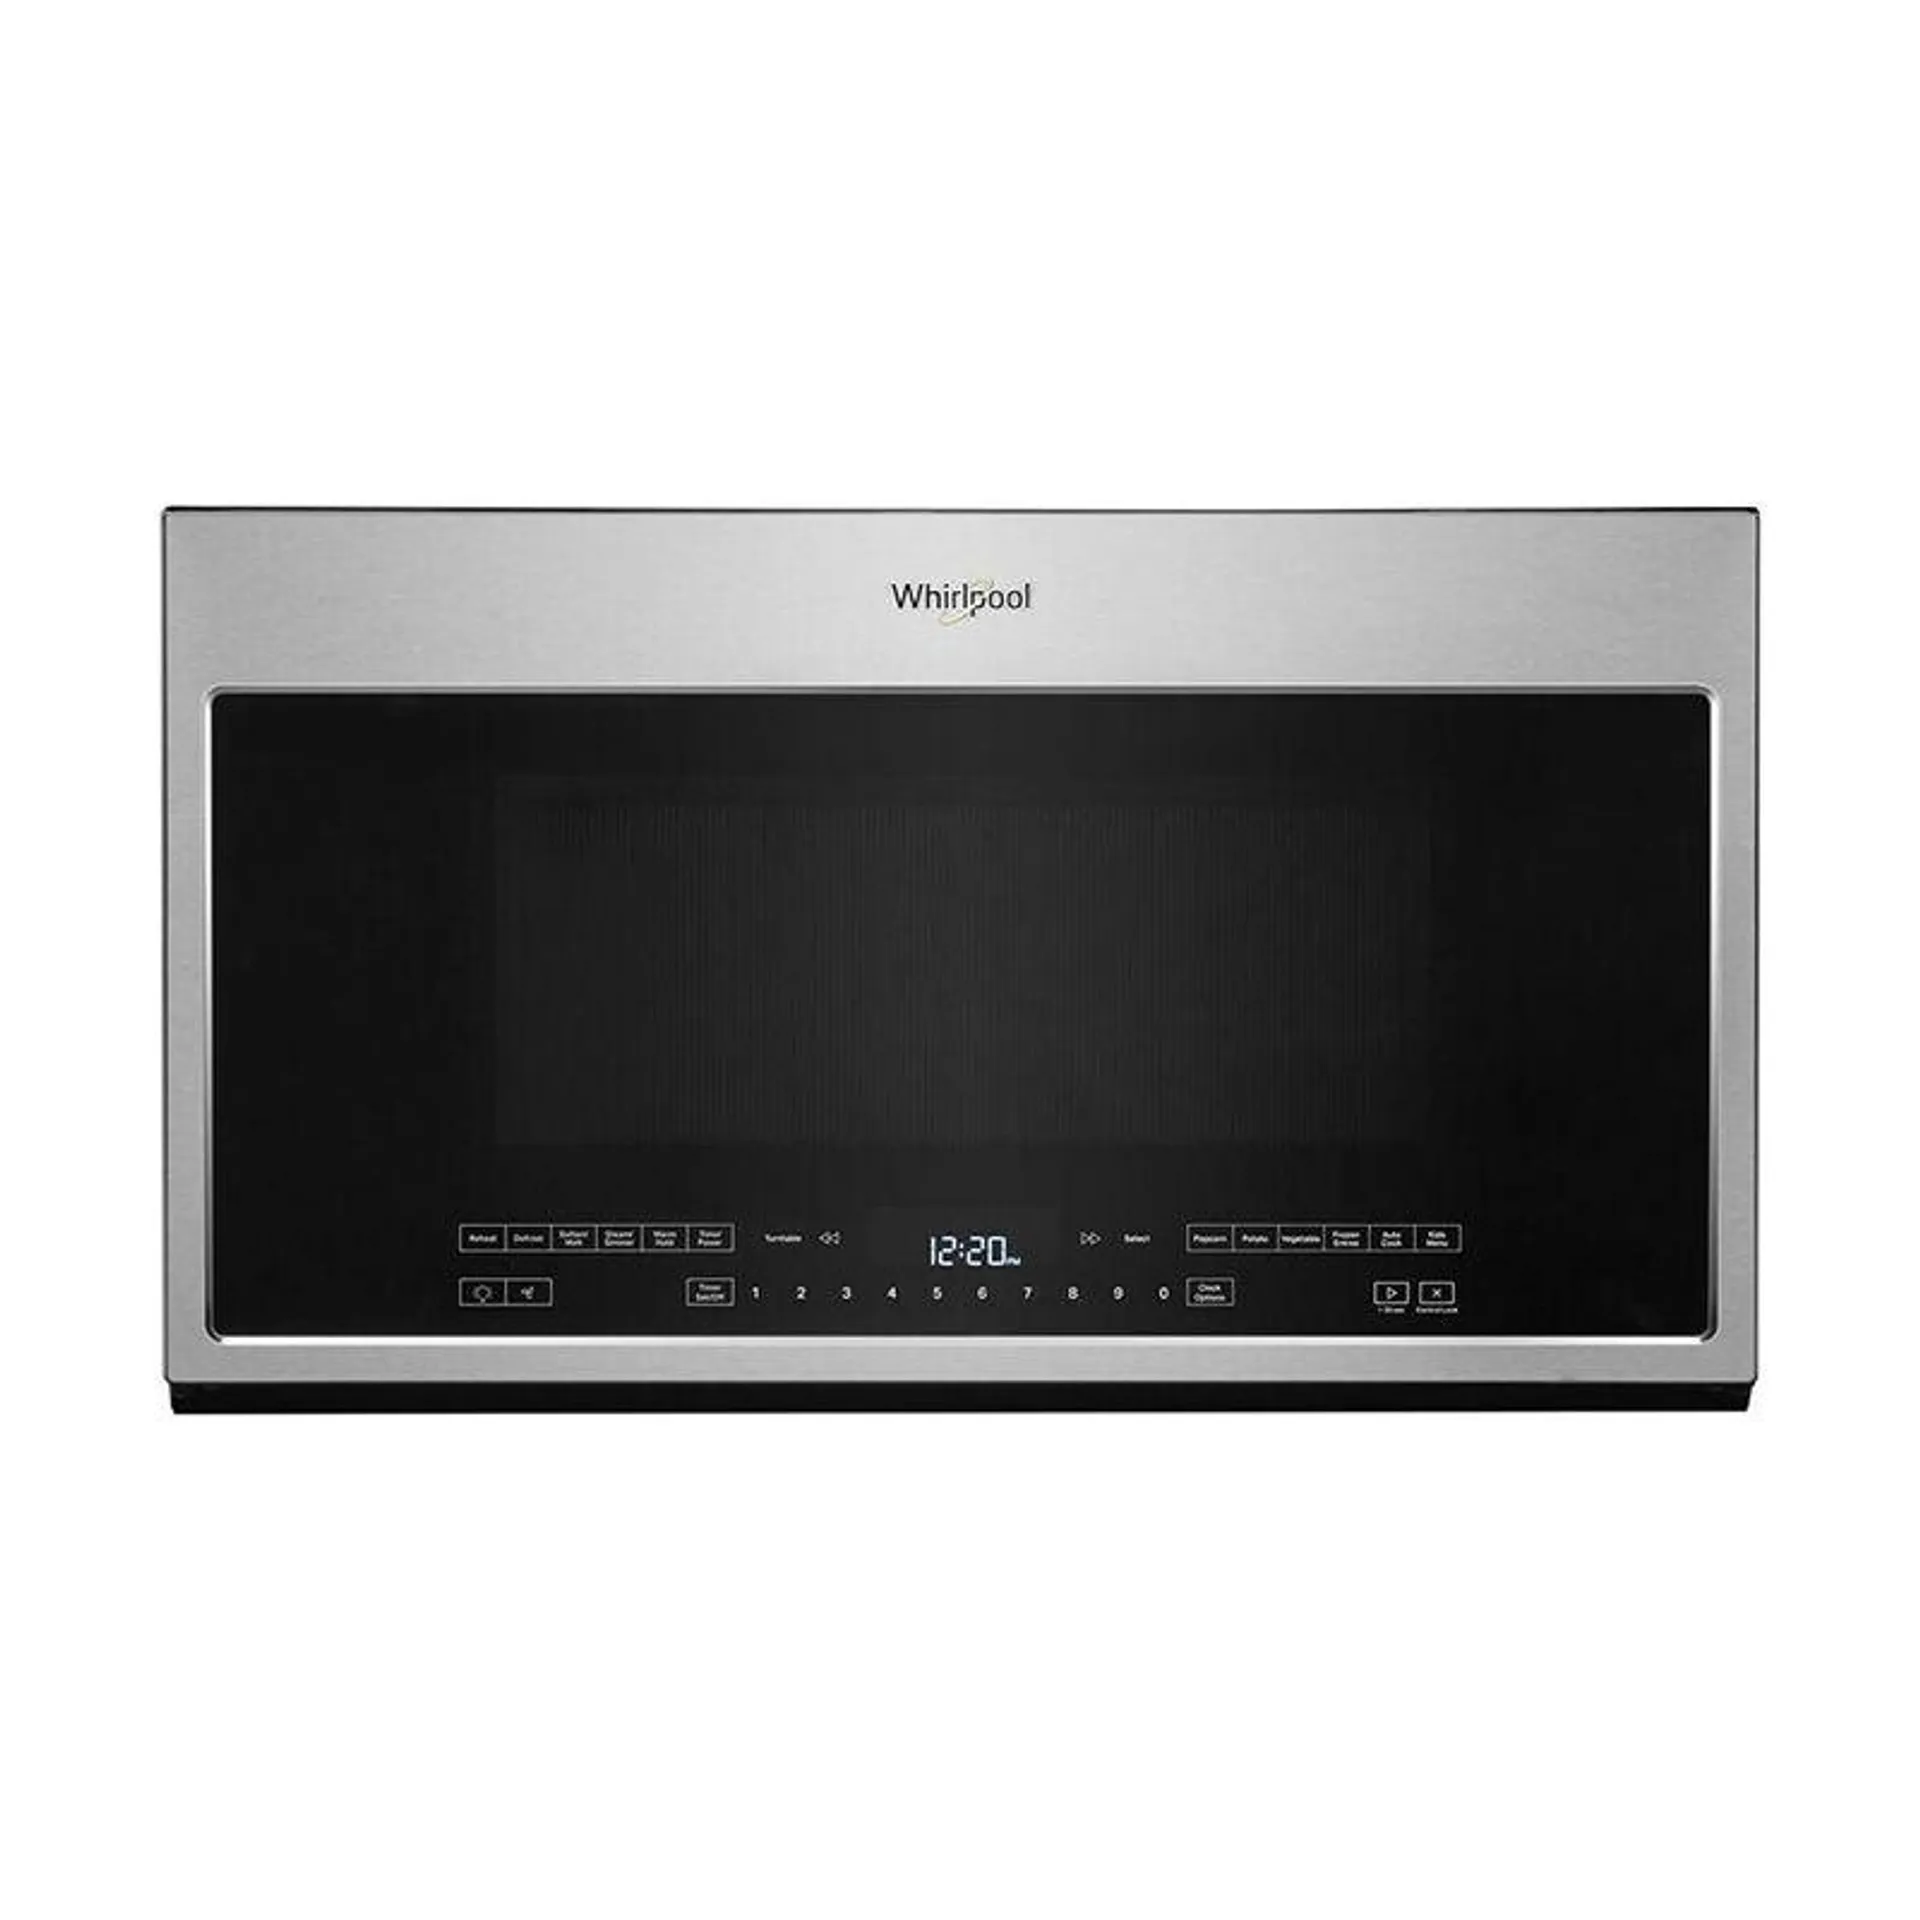 Whirlpool 30" 2.1 Cu. Ft. Over-the-Range Microwave with 10 Power Levels, 300 CFM & Sensor Cooking Controls - Fingerprint Resistant Stainless Steel